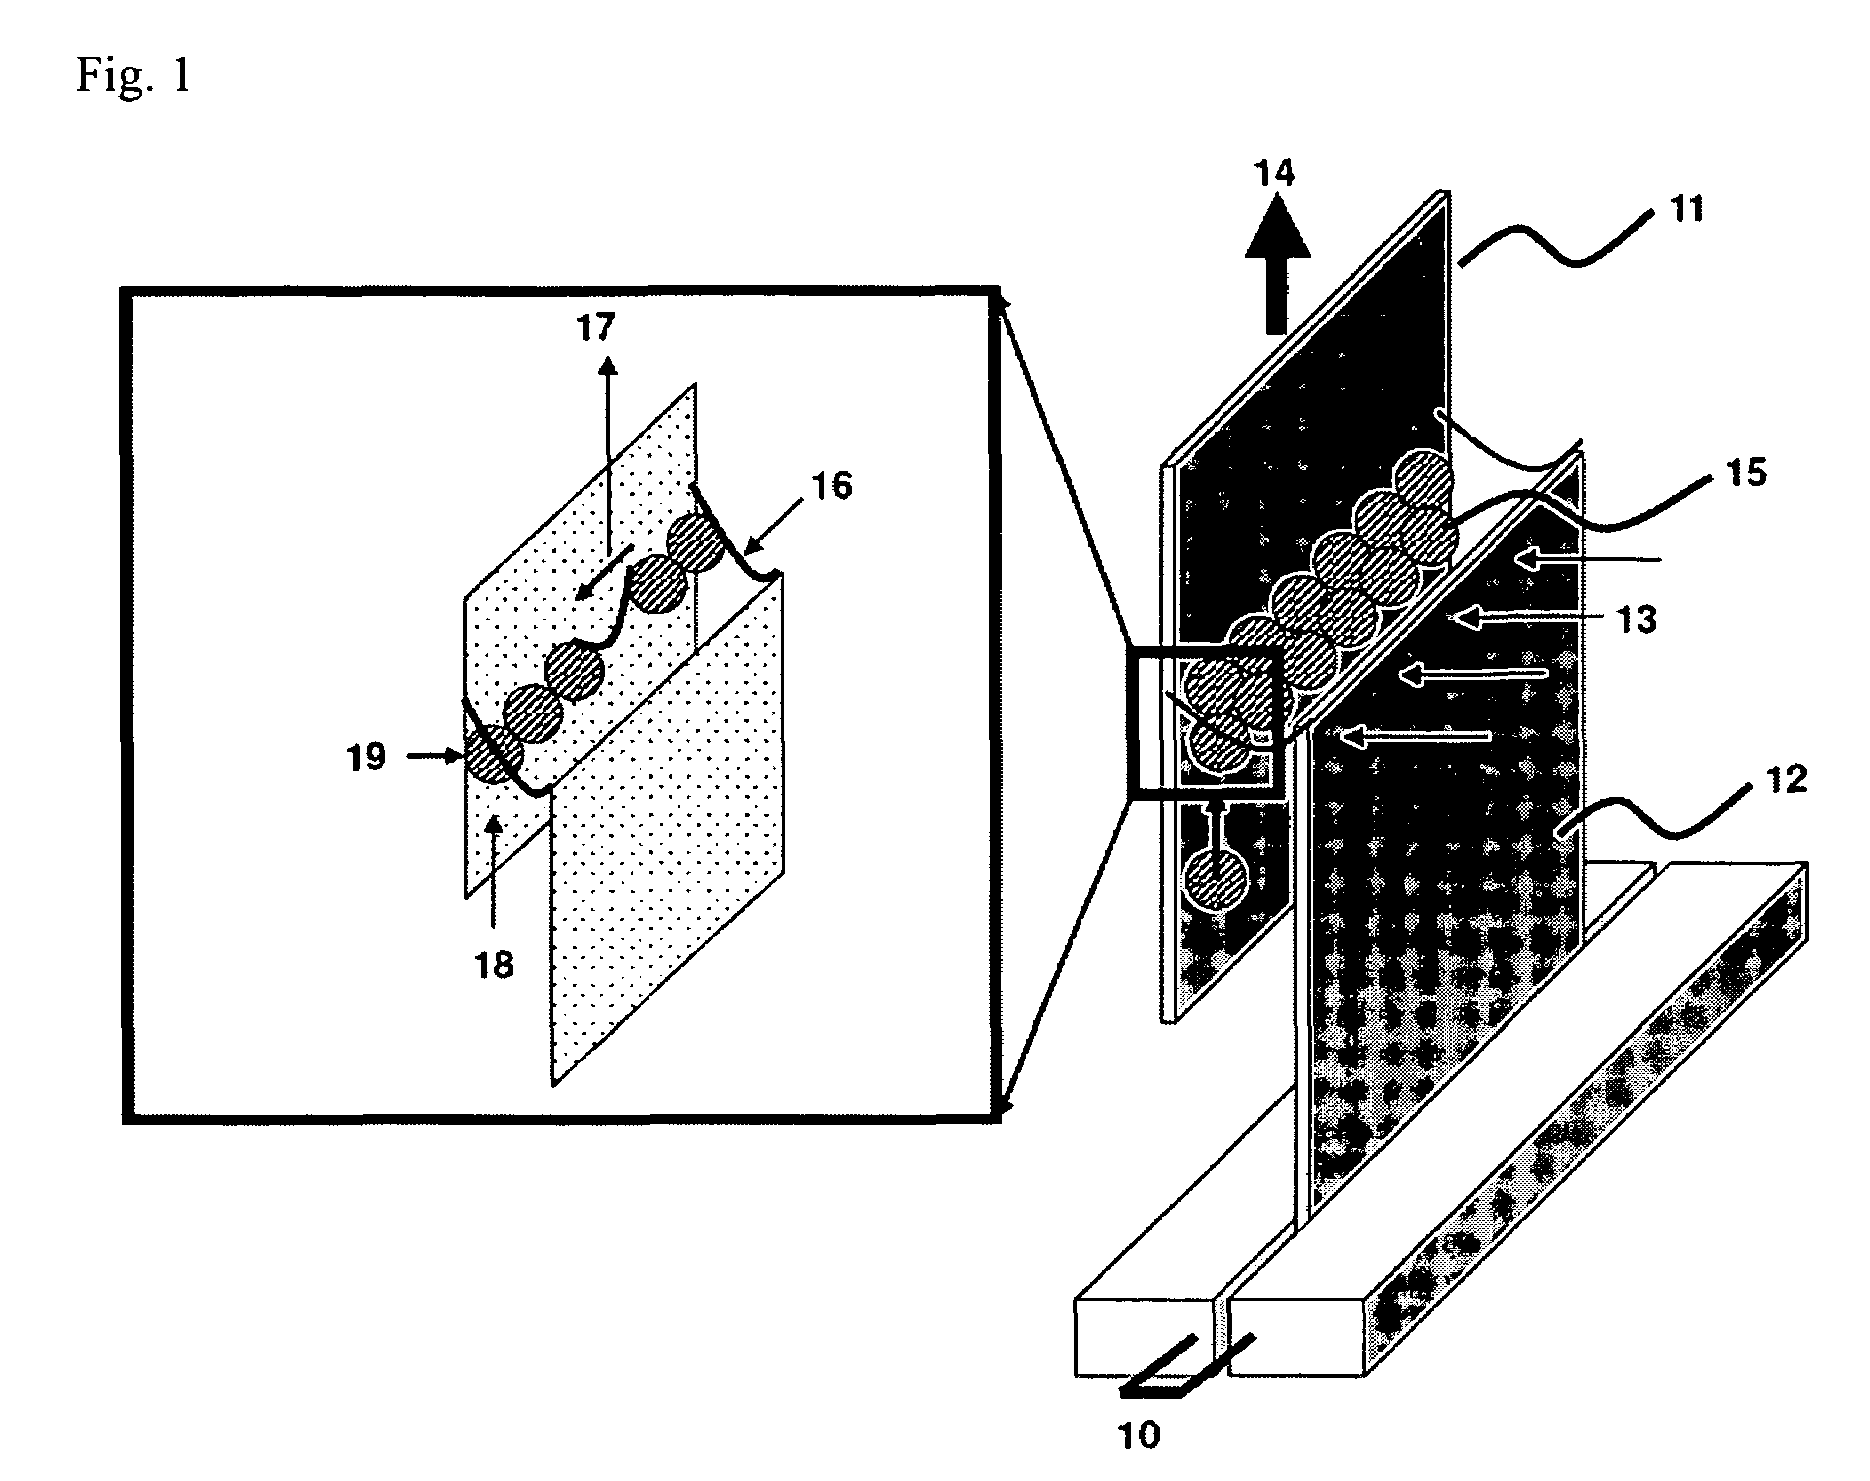 Method for manufacturing colloidal crystals via confined convective assembly